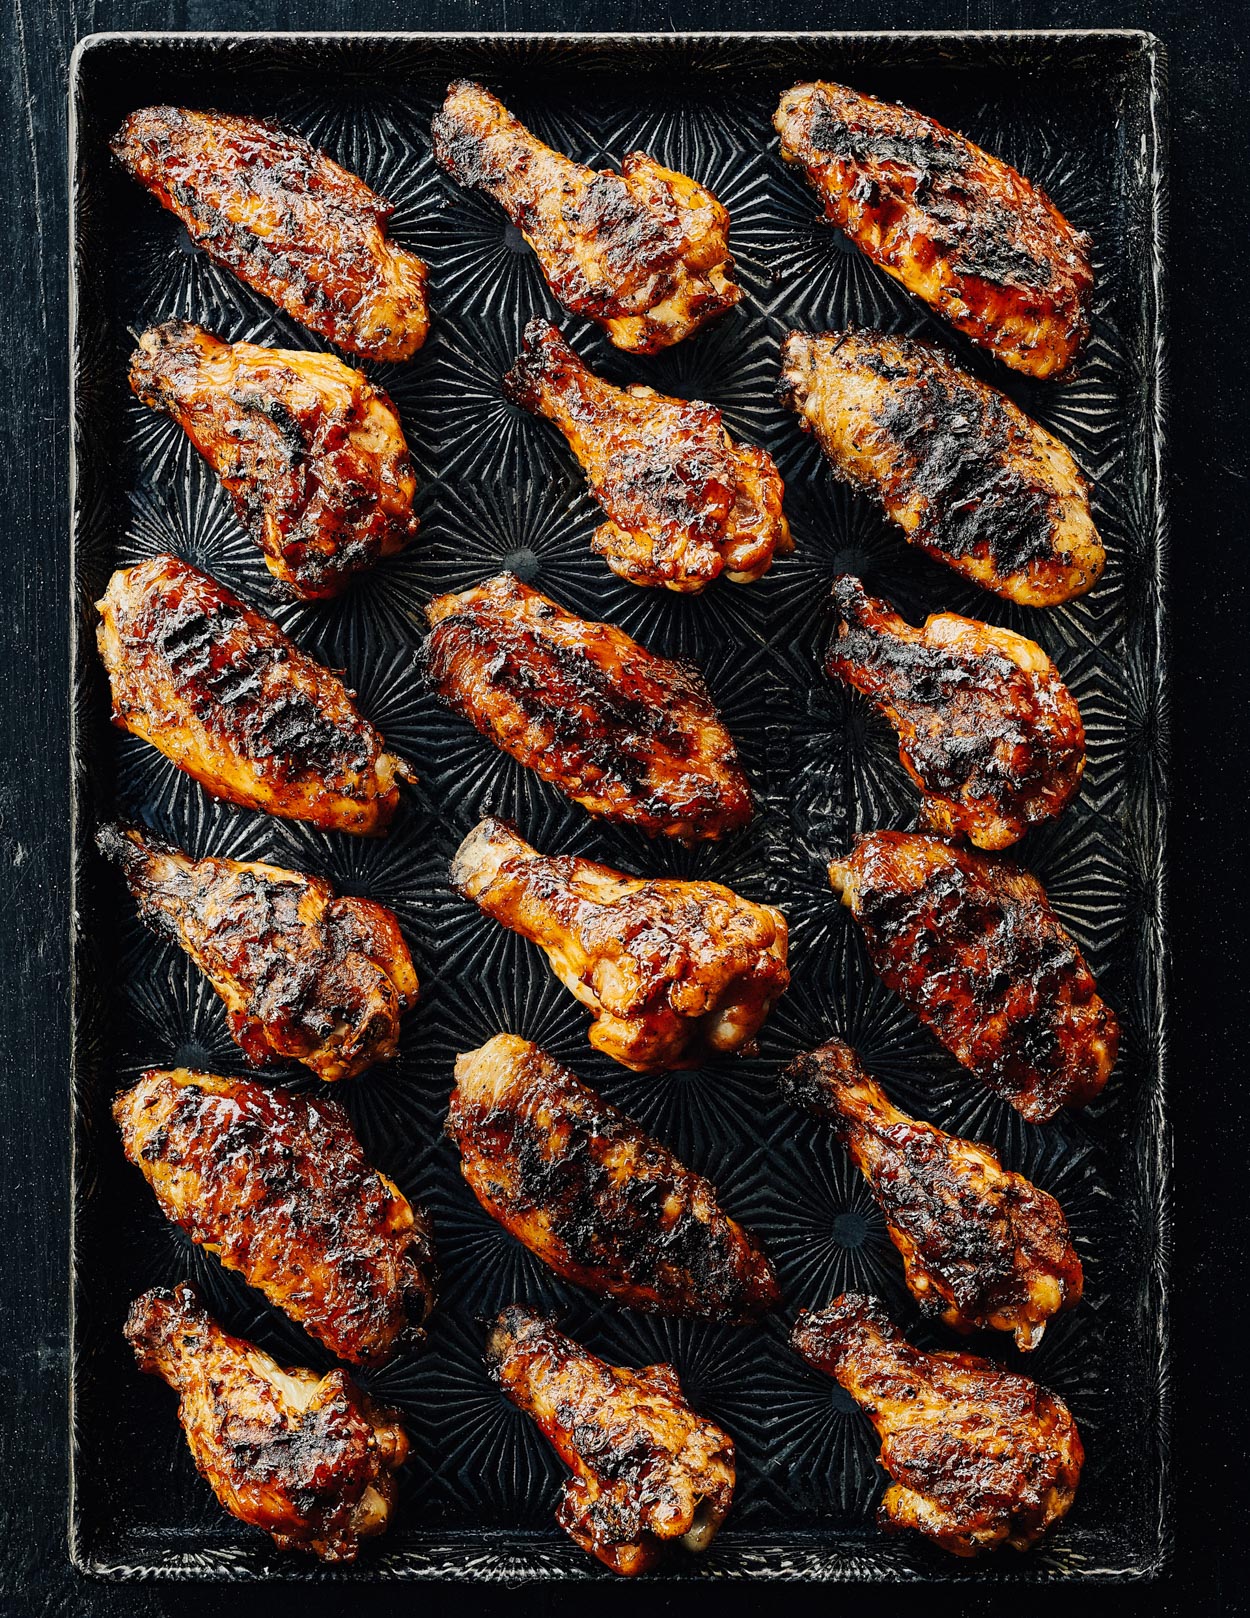 Los Angeles Food photographer - Weber Ultimate Grilling  Cookbook Weber Grilled Chicken Wings  by Ray Kachatorian